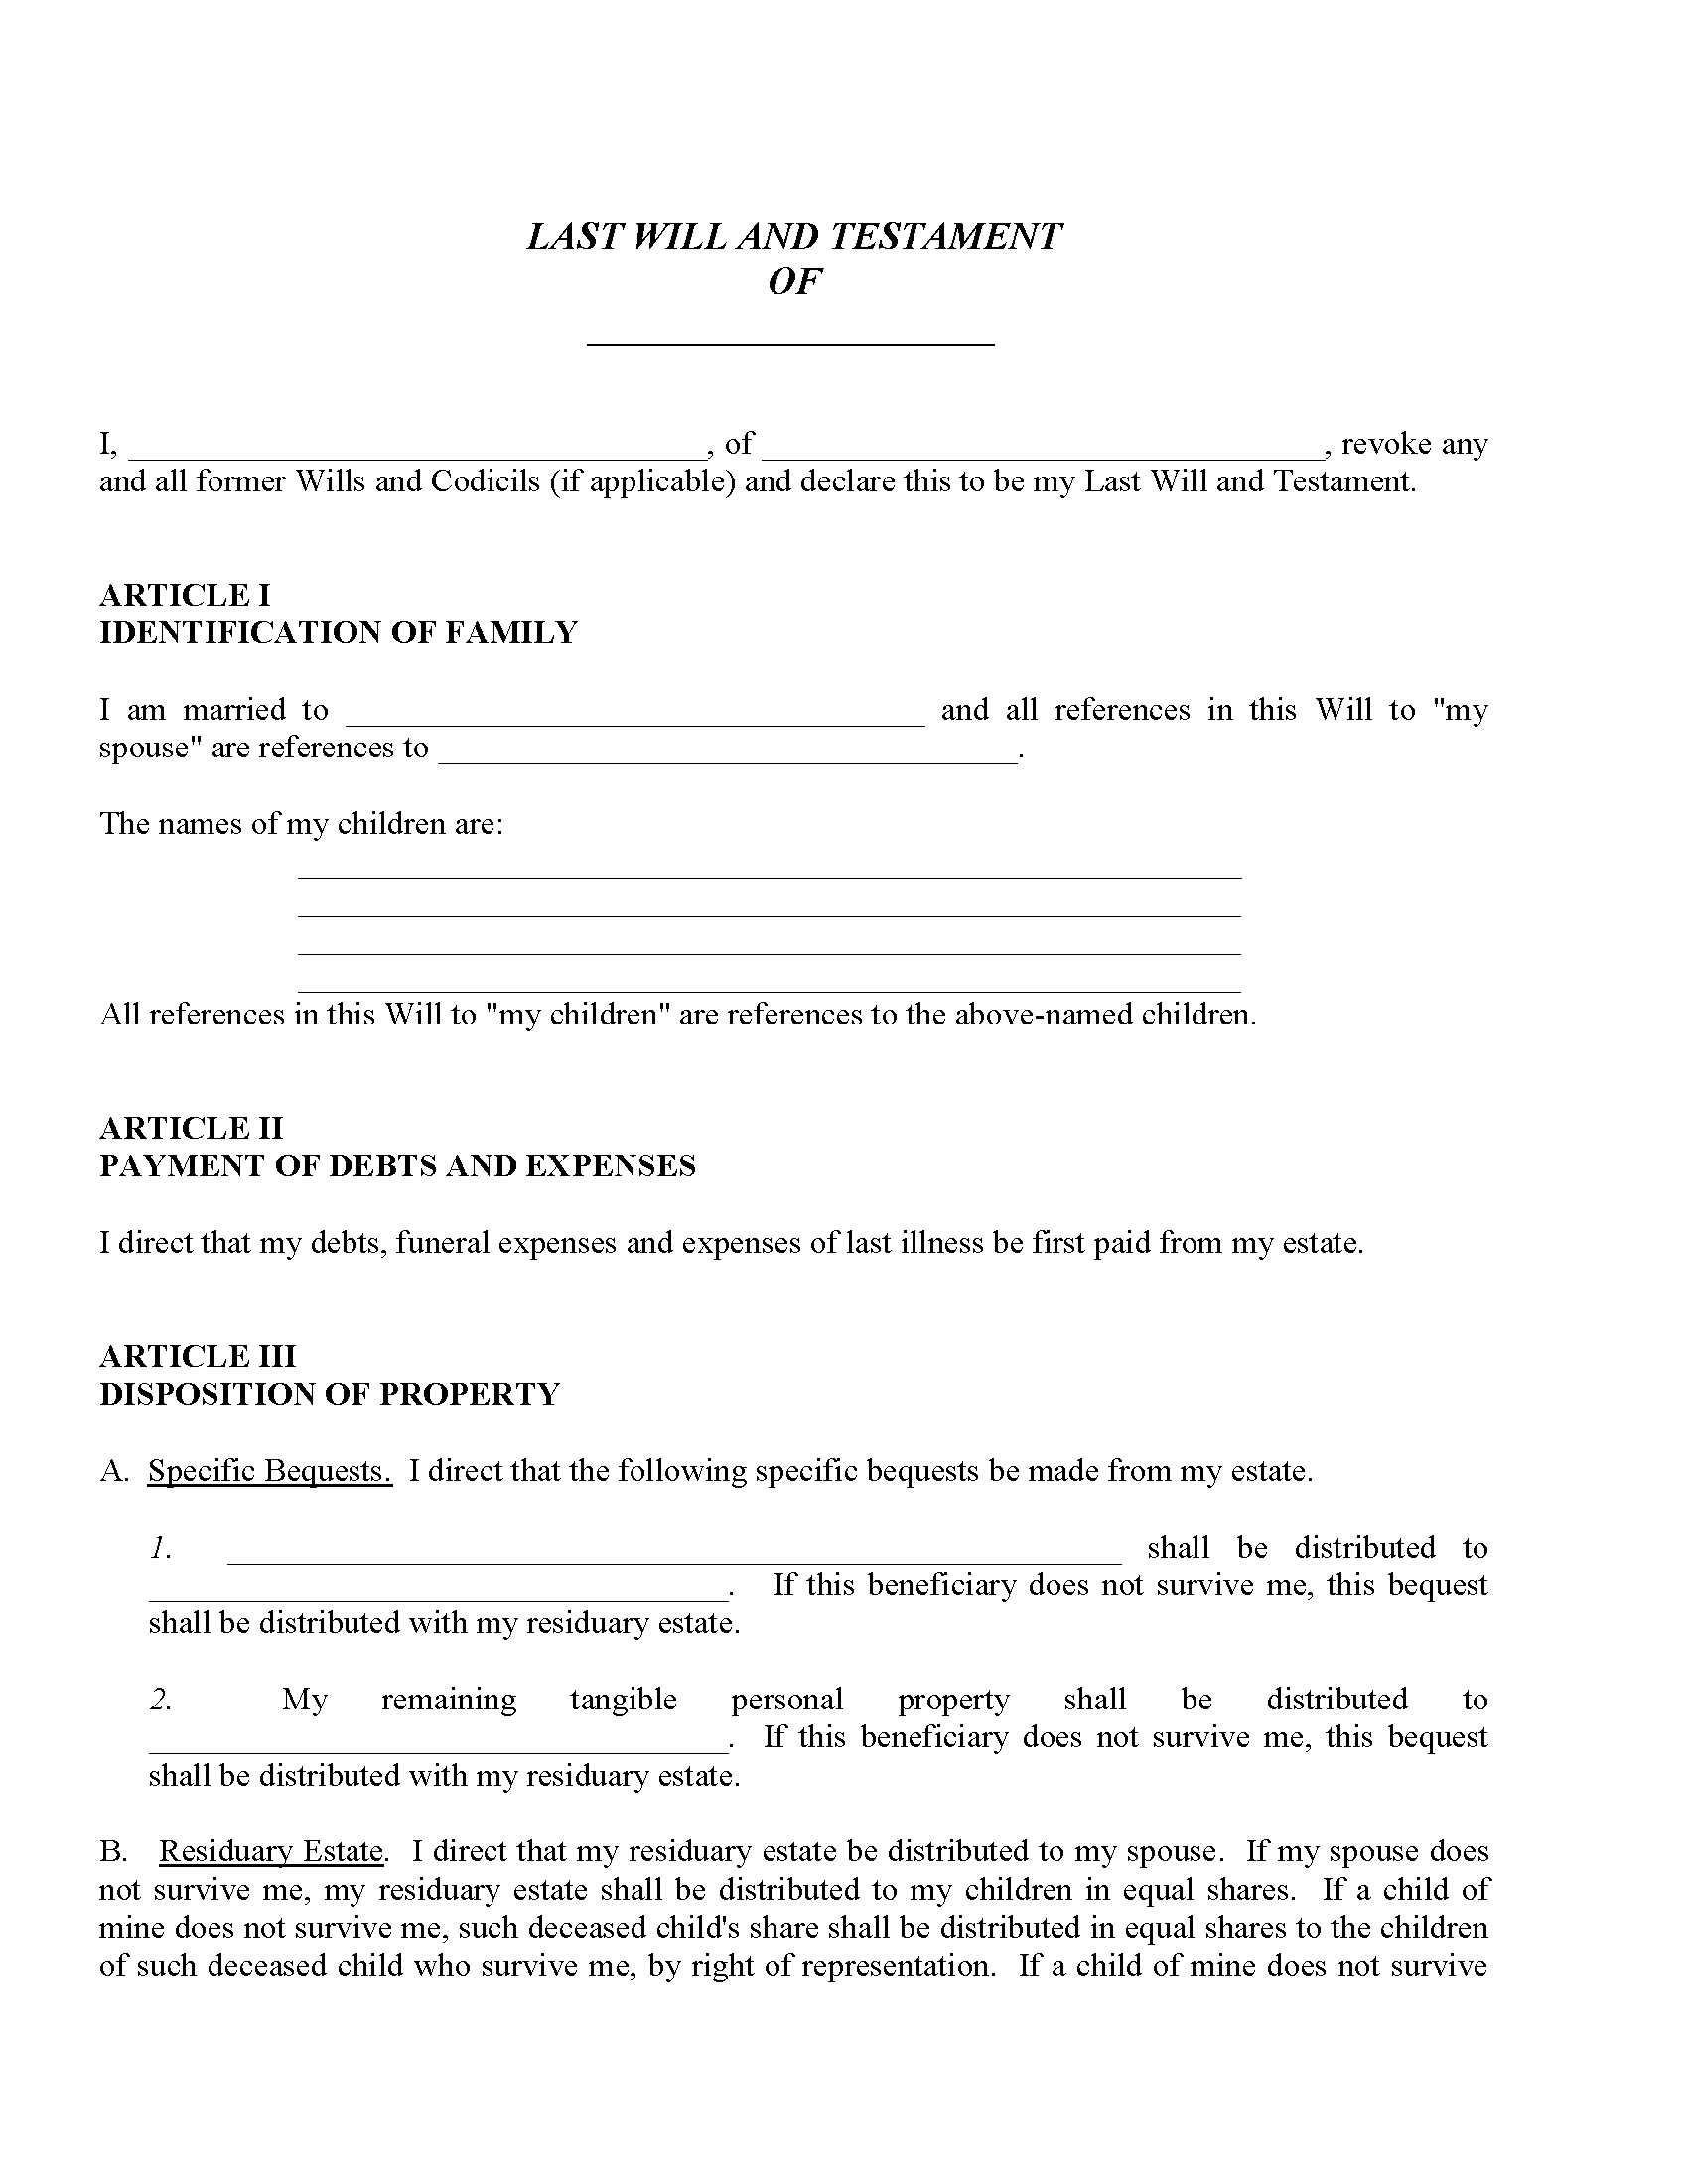 Ohio Last Will and Testament Free Printable Legal Forms